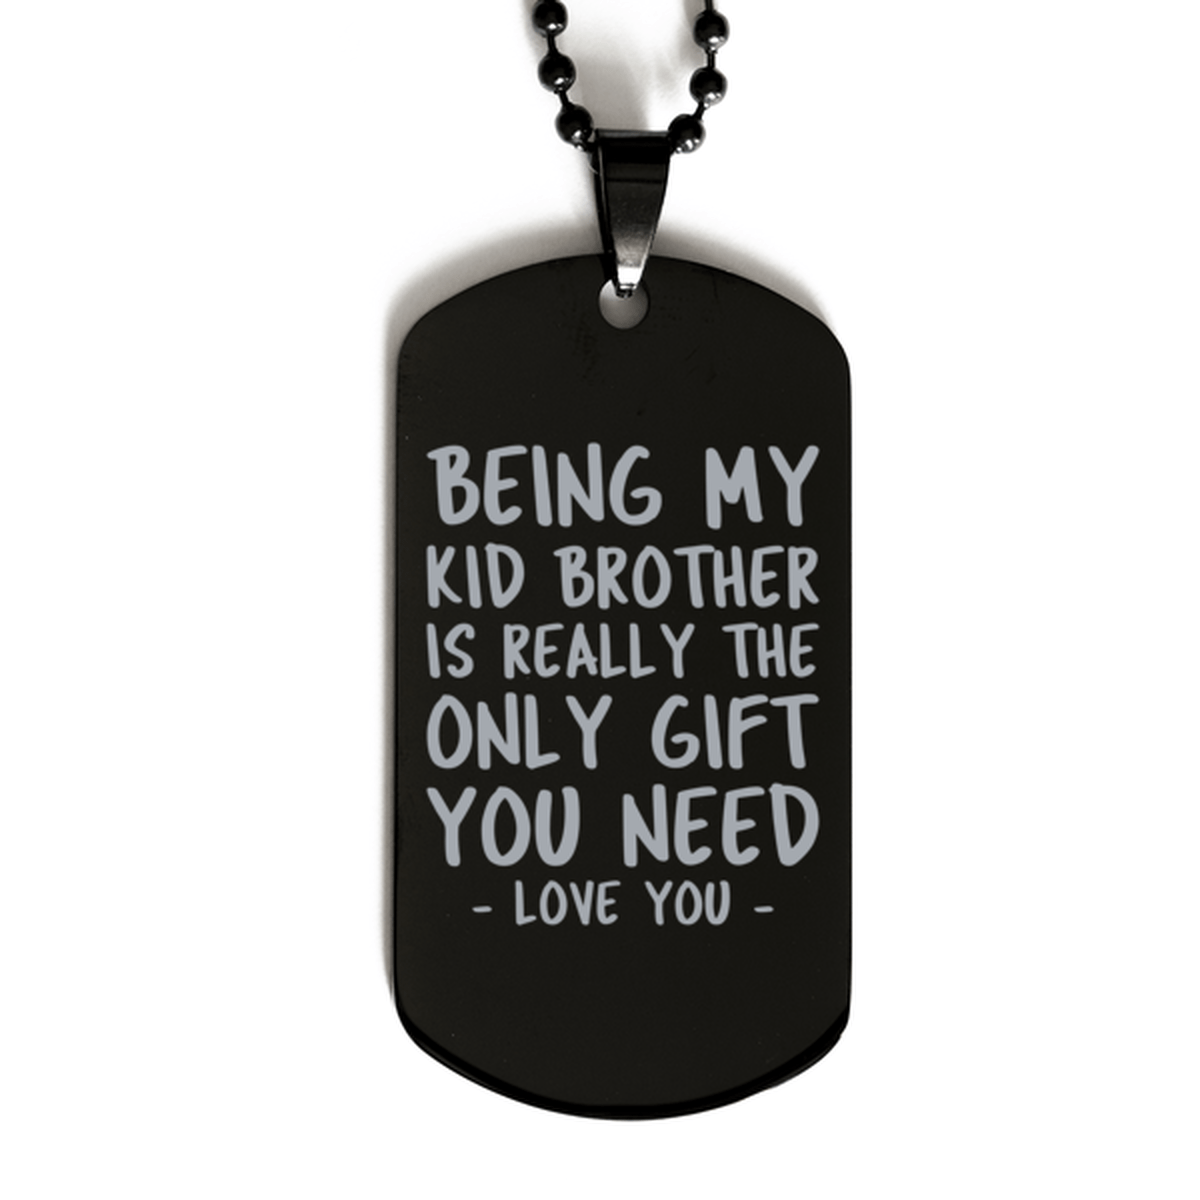 Funny Kid Brother Black Dog Tag Necklace, Being My Kid Brother Is Really the Only Gift You Need, Best Birthday Gifts for Kid Brother